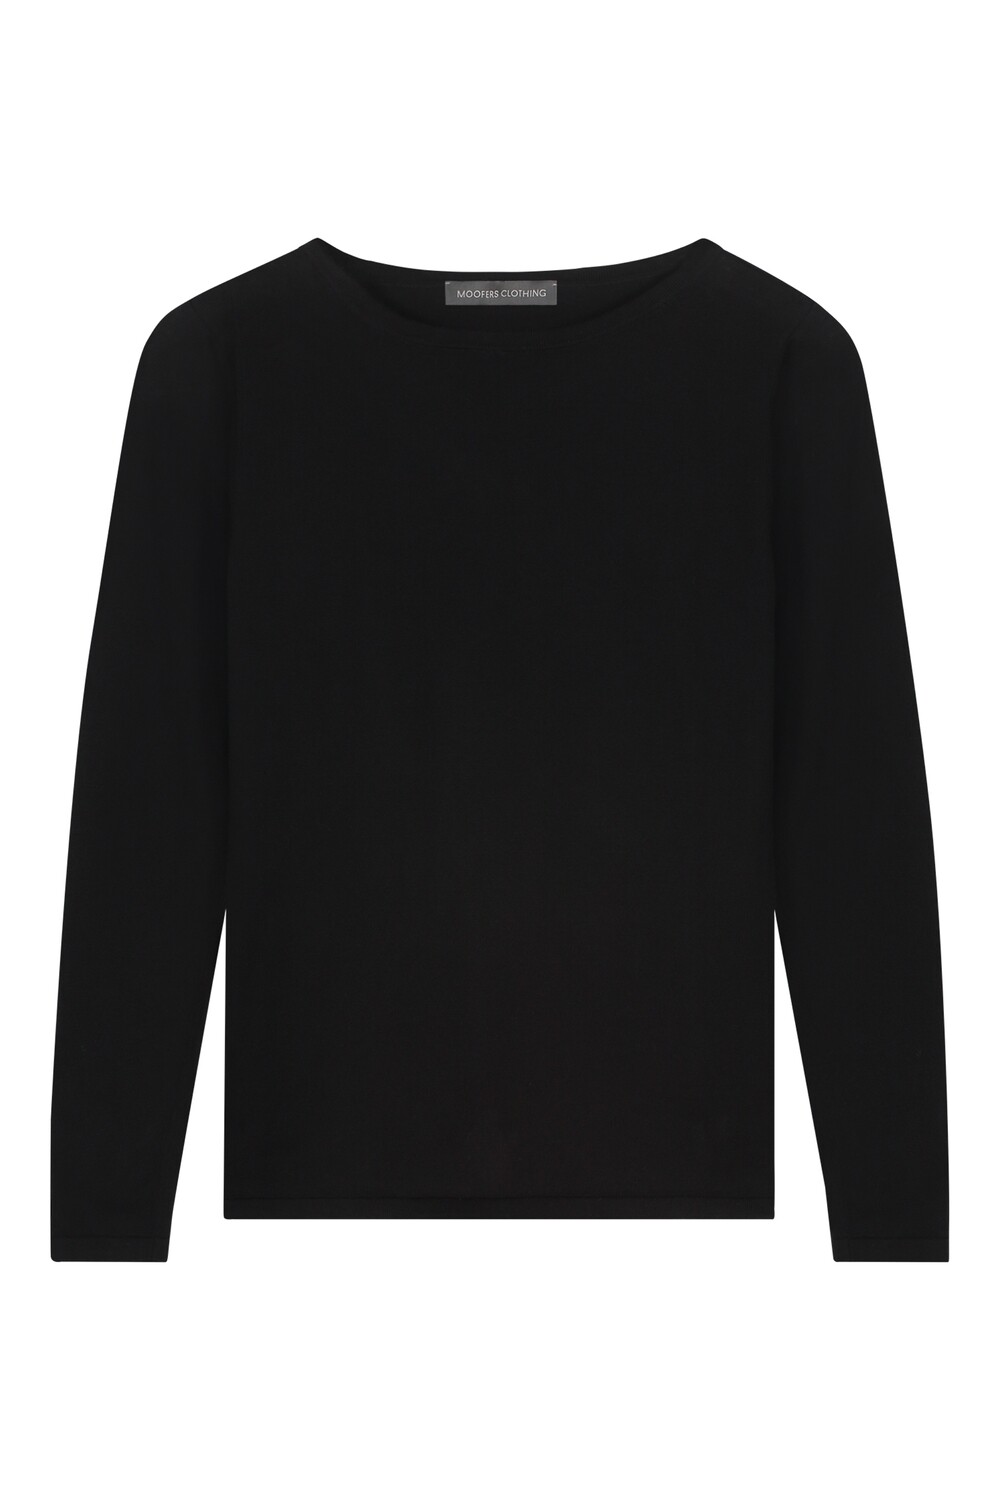 KNITTED T-SHIRT LONG SLEEVE ORGANIC COTTON IN BLACK